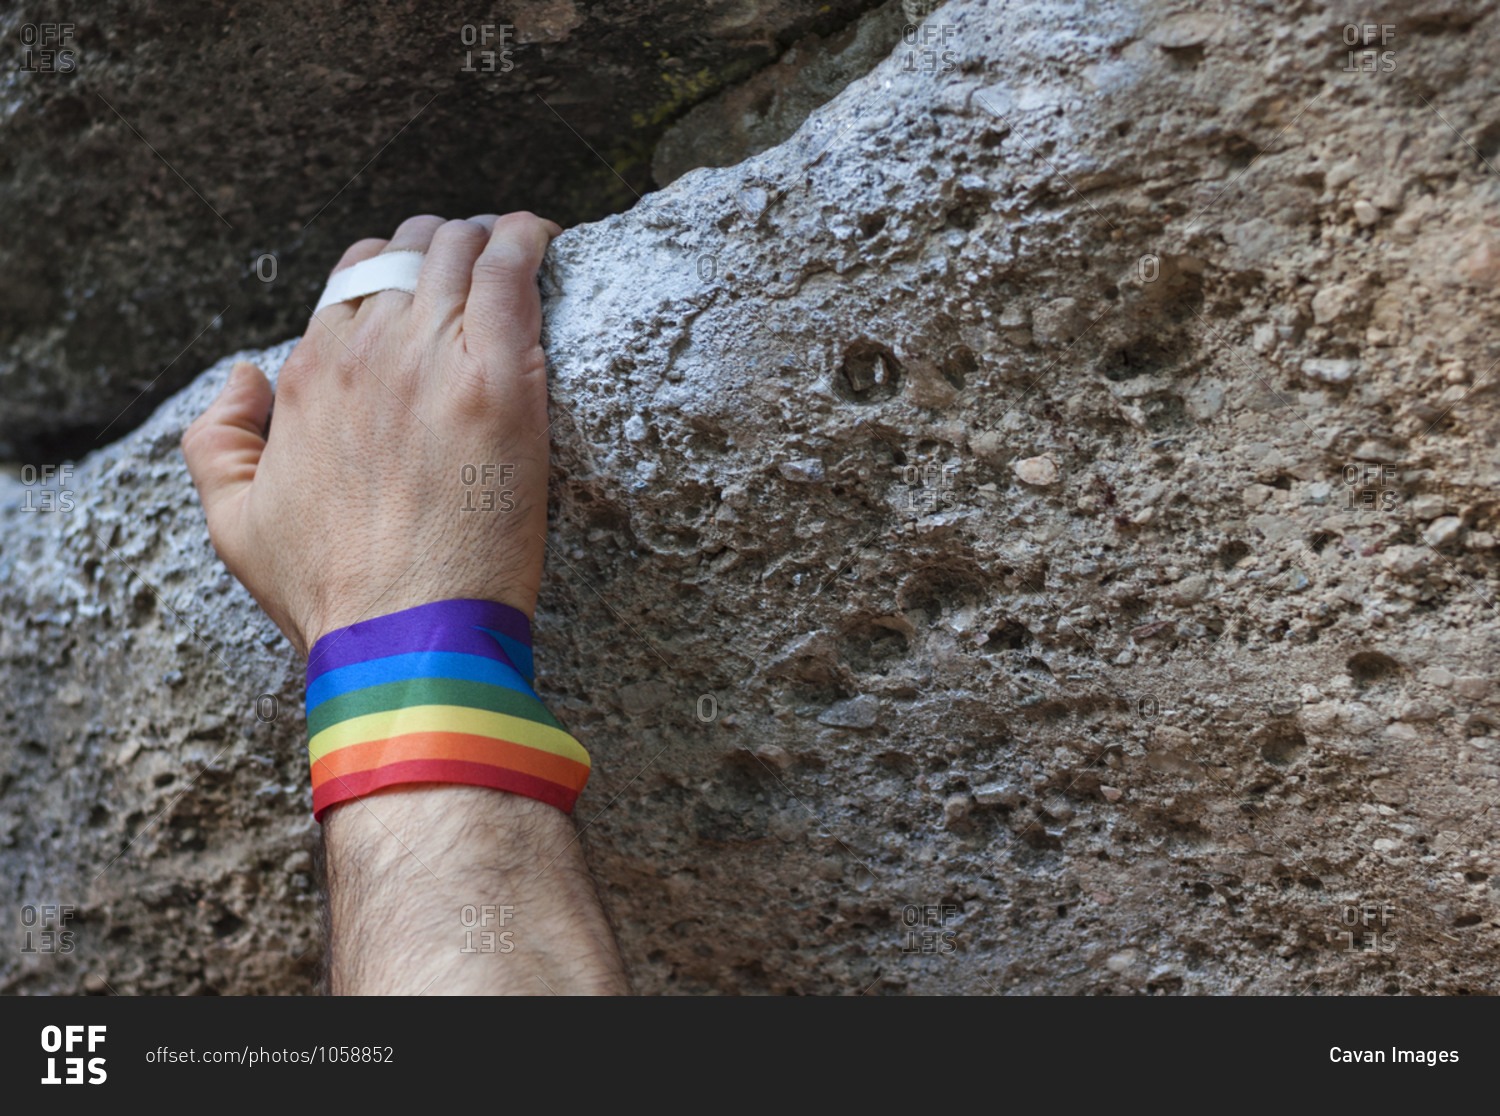 Climbing hand with gay pride bracelet